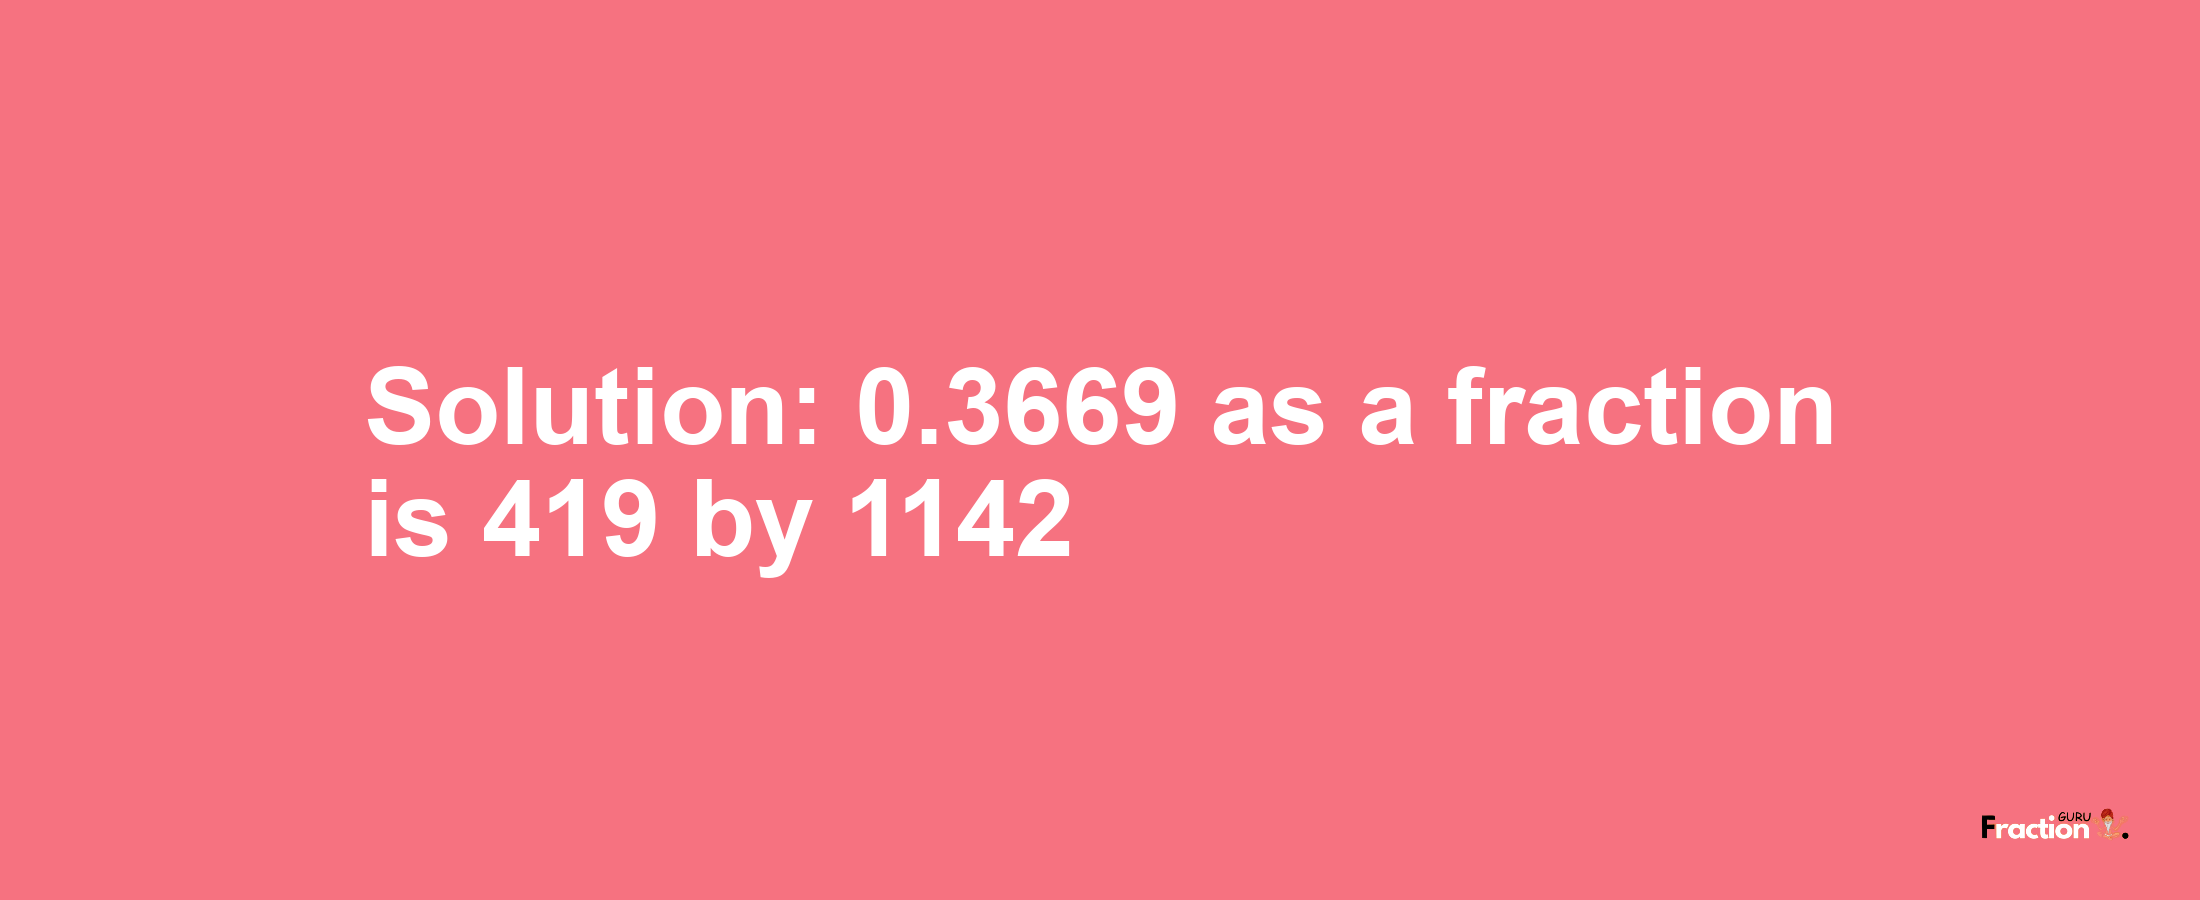 Solution:0.3669 as a fraction is 419/1142